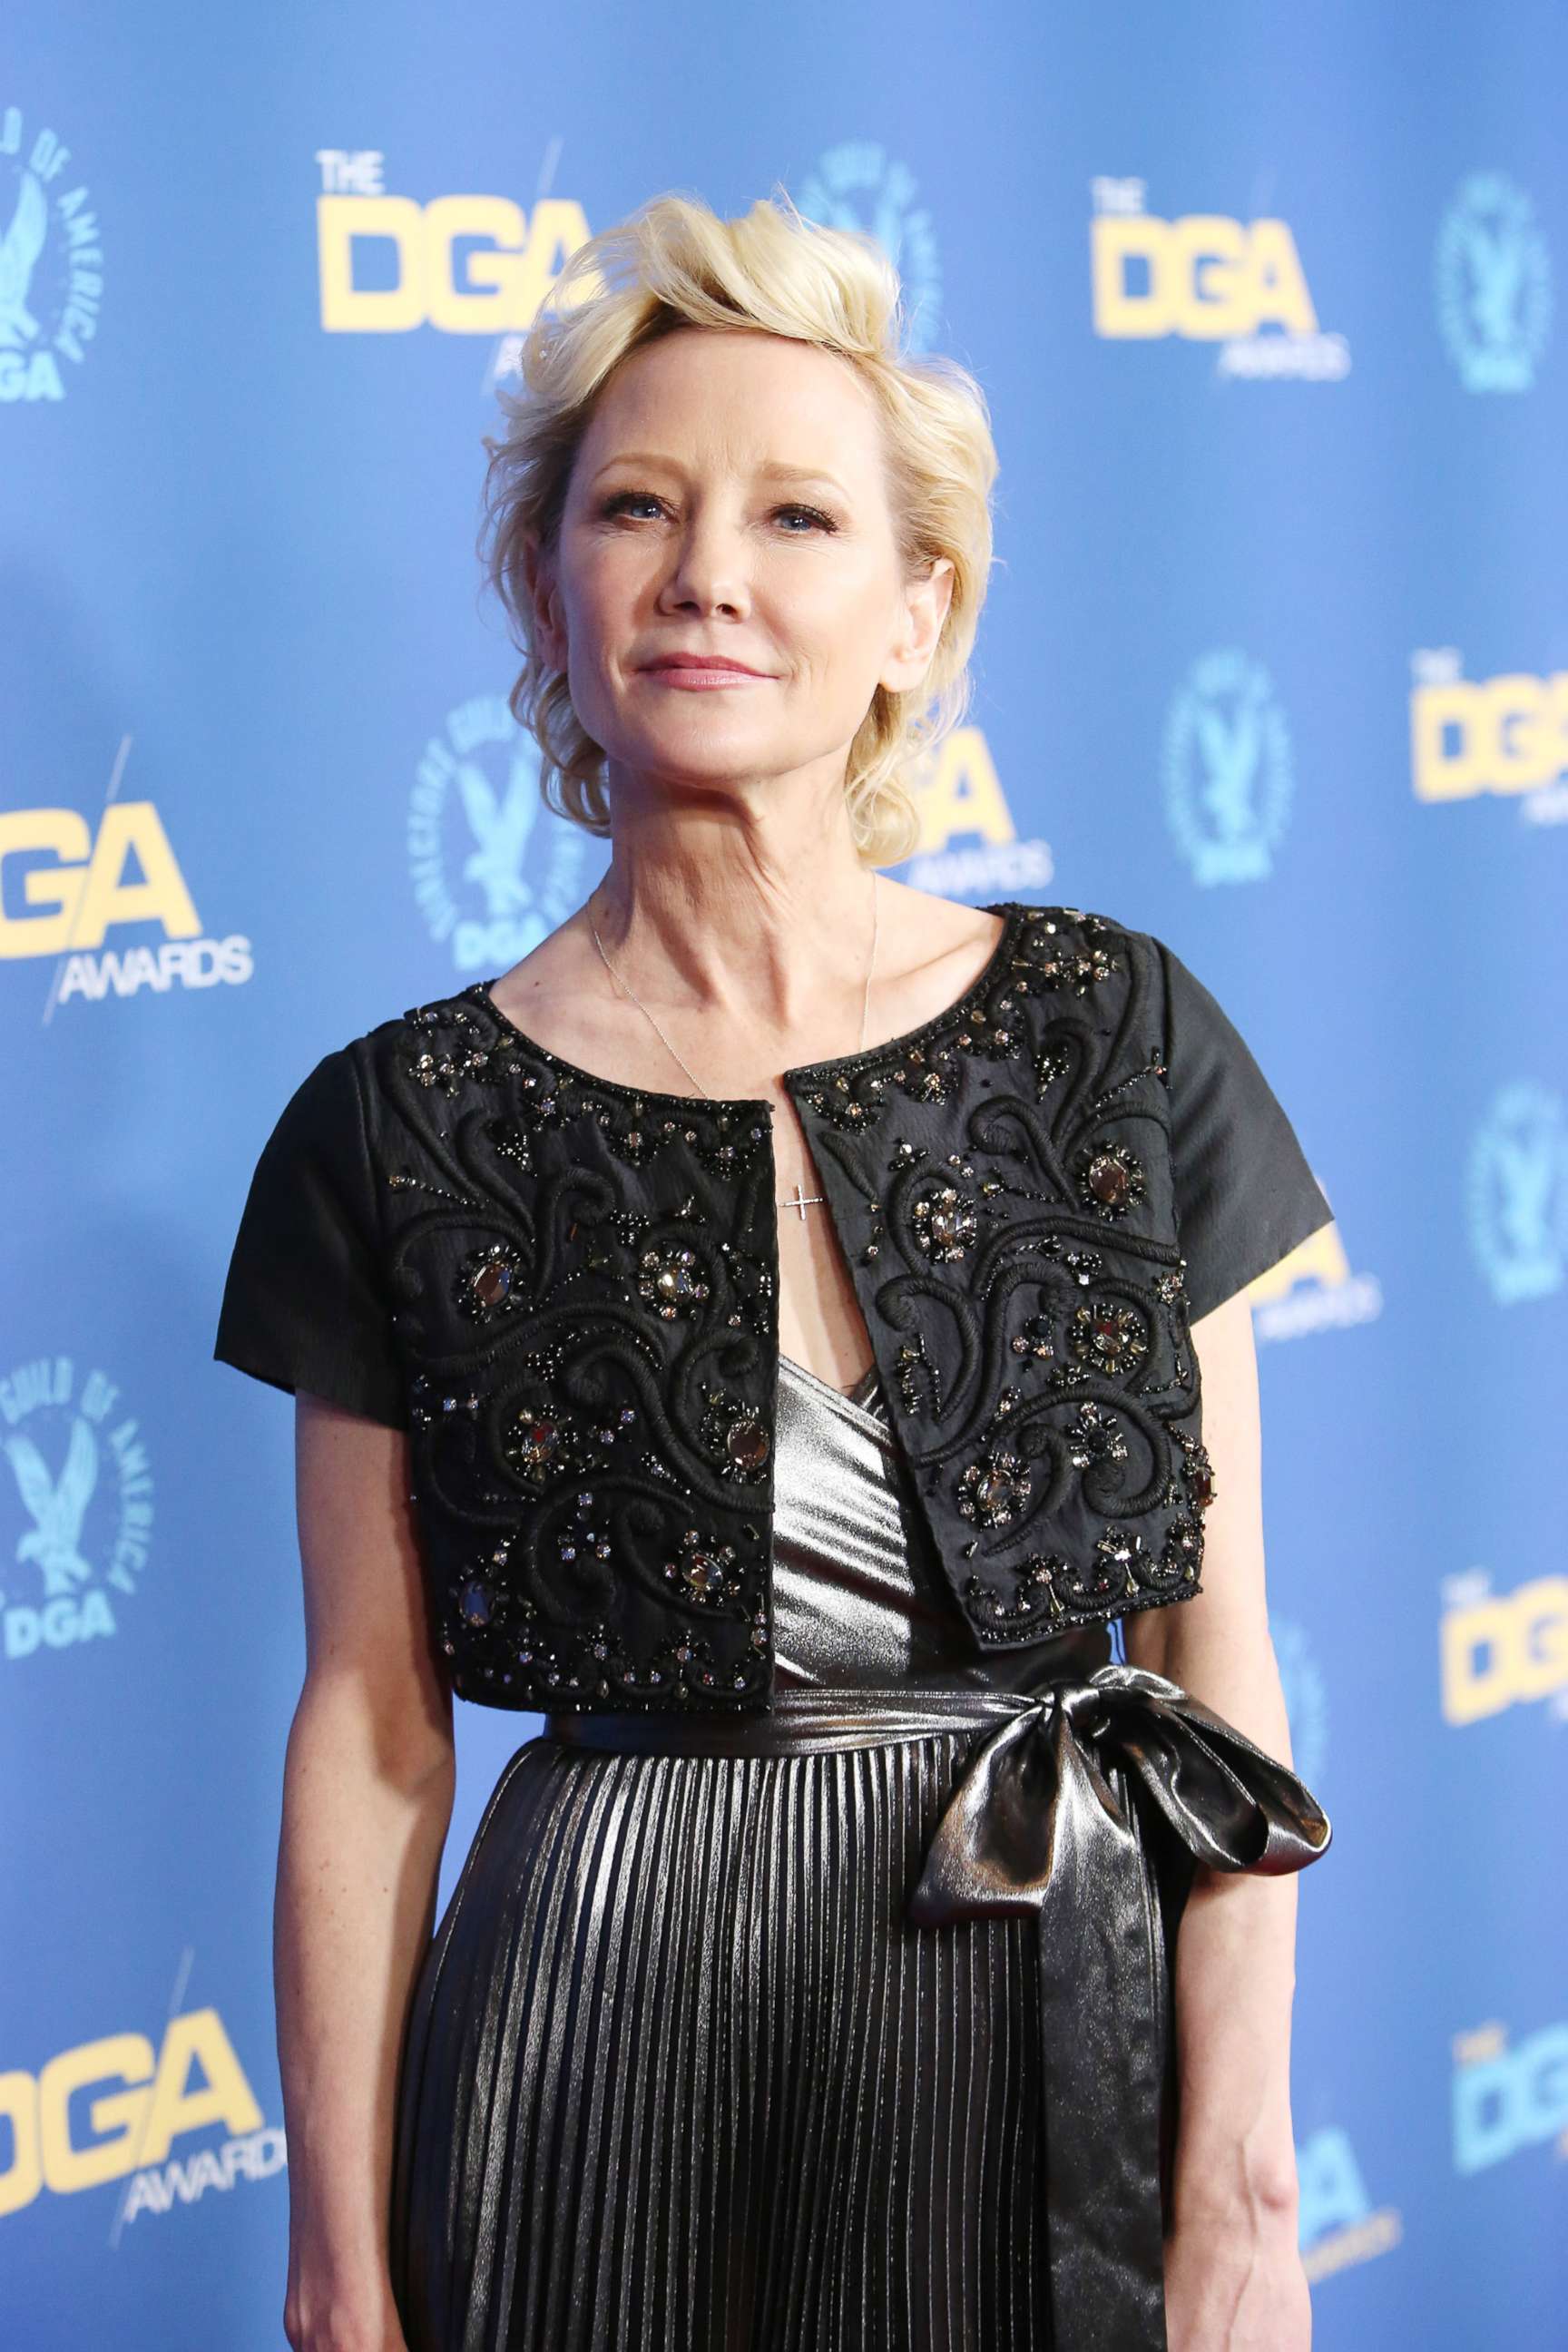 PHOTO: Anne Heche attends the 74th Annual Directors Guild Of America Awards, on March 12, 2022 in Beverly Hills, Calif.